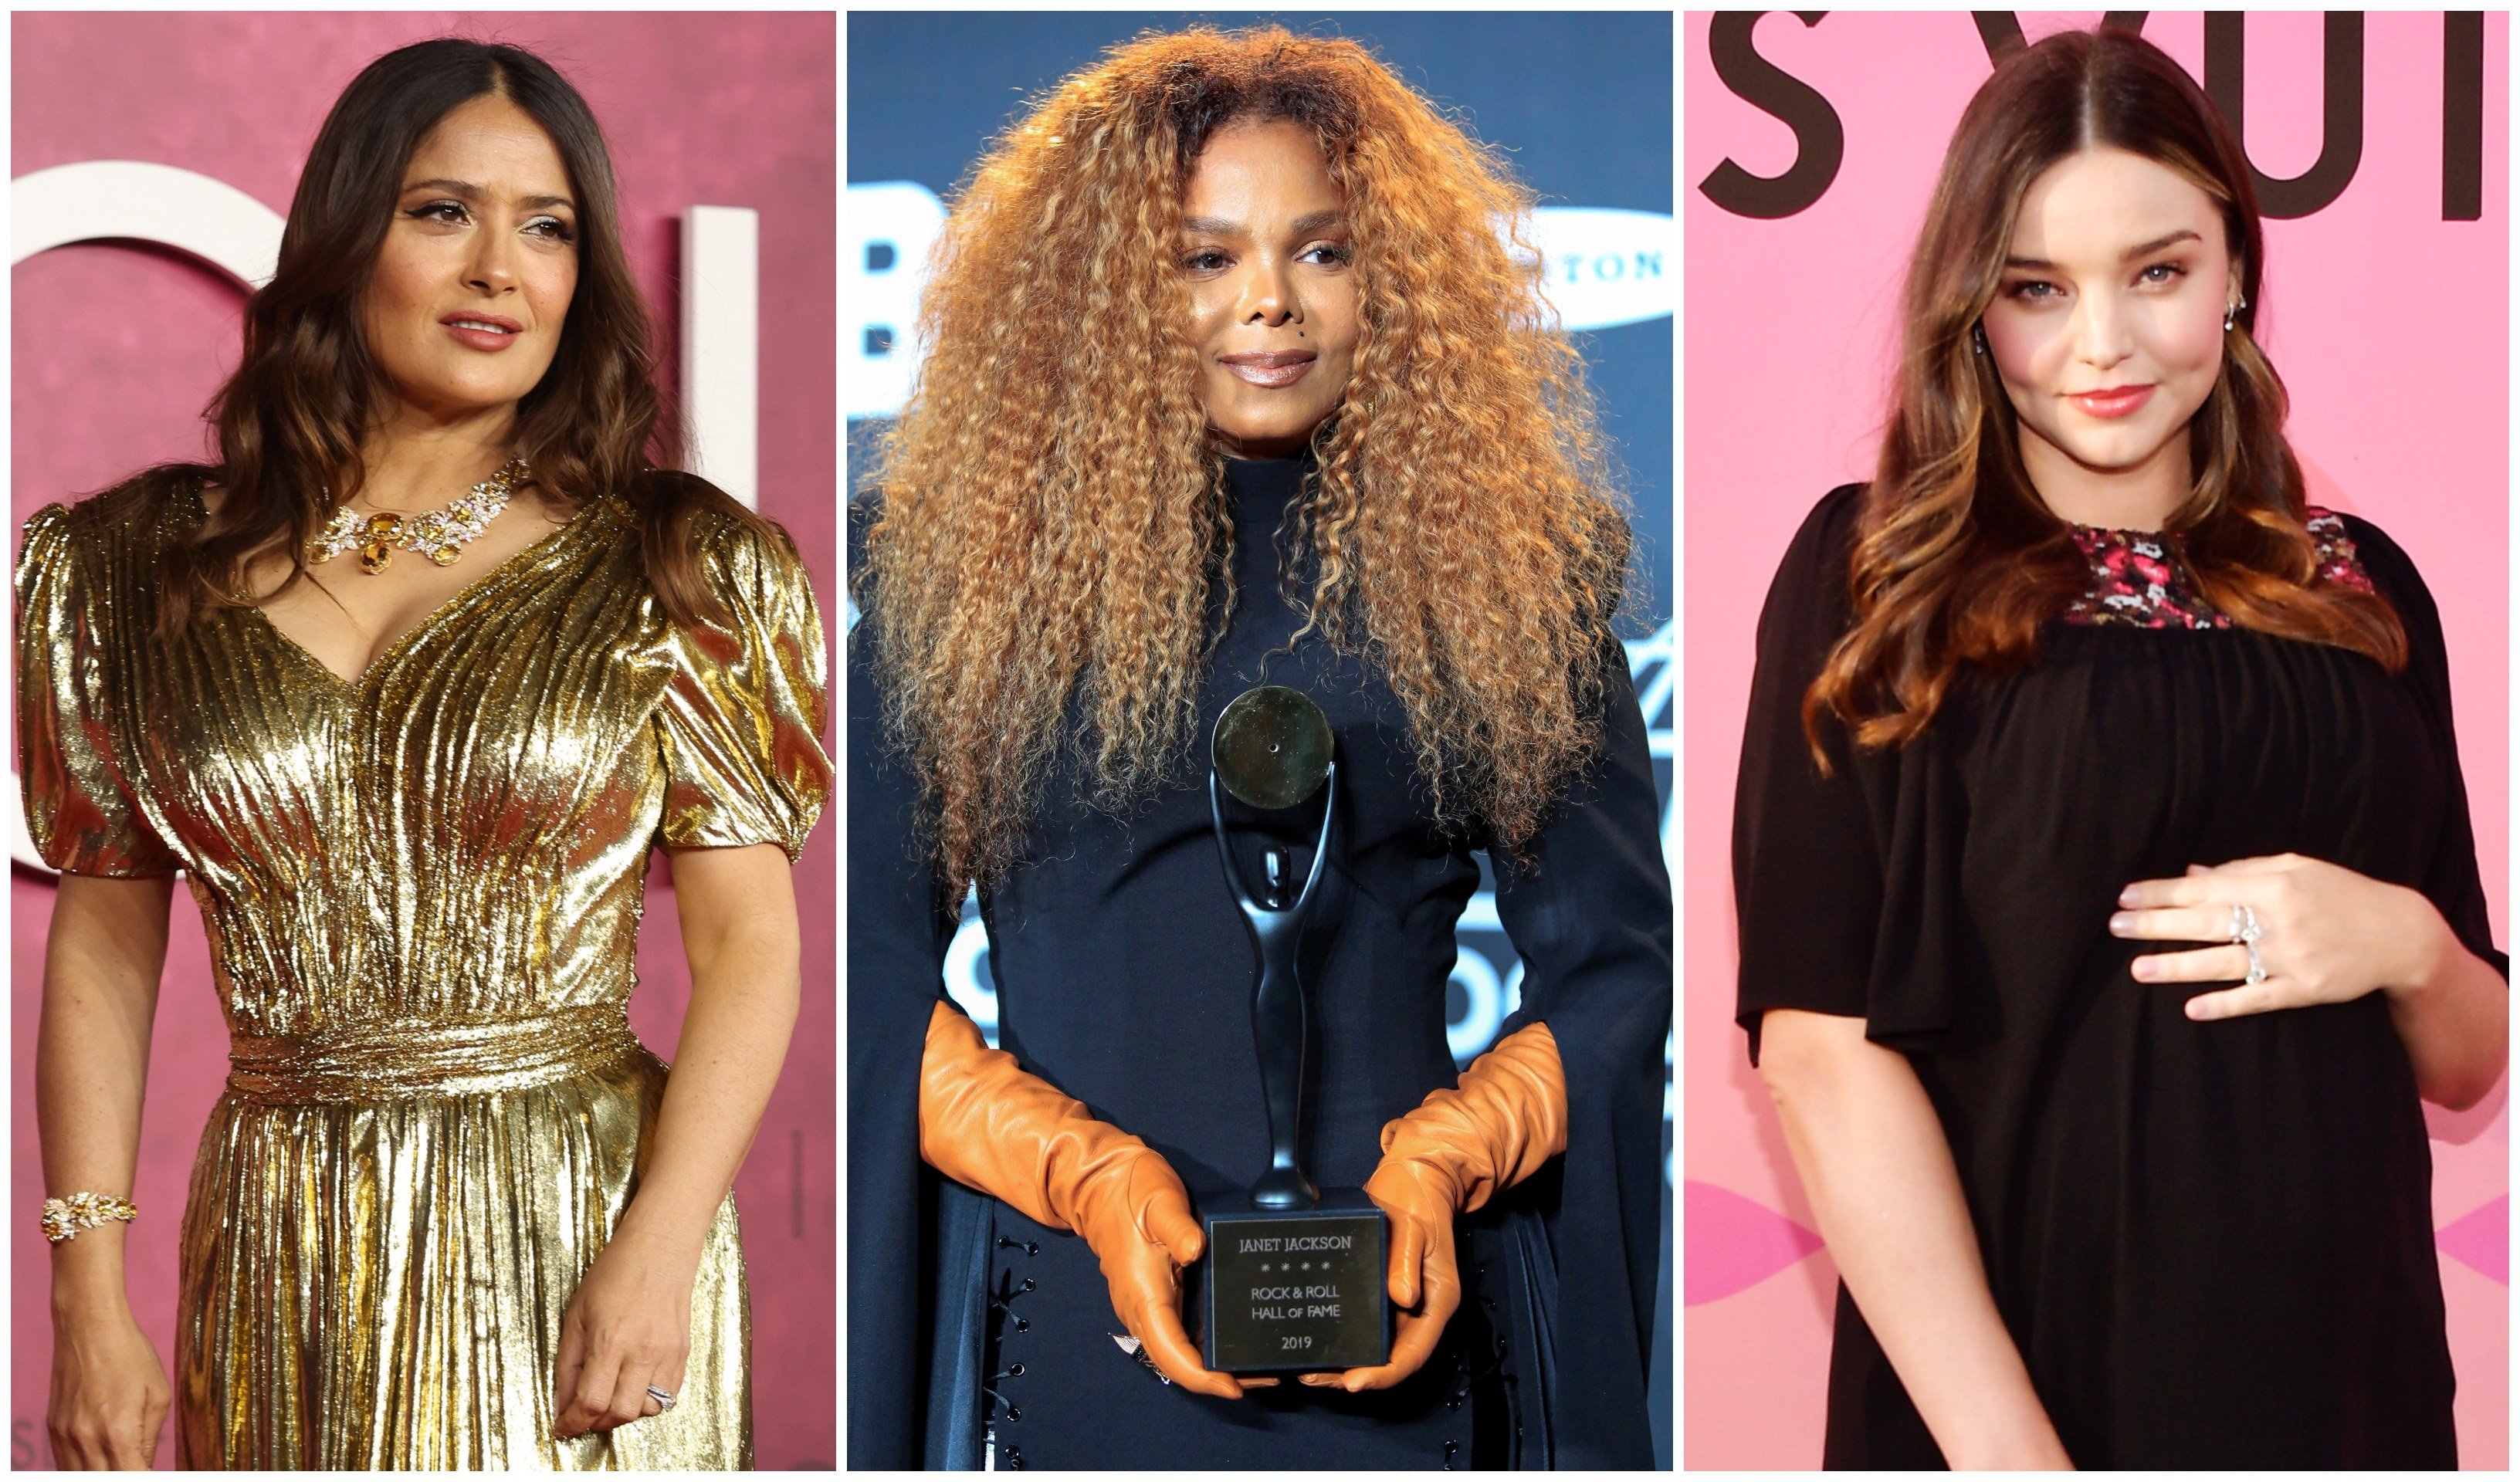 Salma Hayek, Janet Jackson and Miranda Kerr are all talented, famous and rich women in their own right ... who also married very rich husbands. Photos: EPA-EFE, Reuters, Getty Images